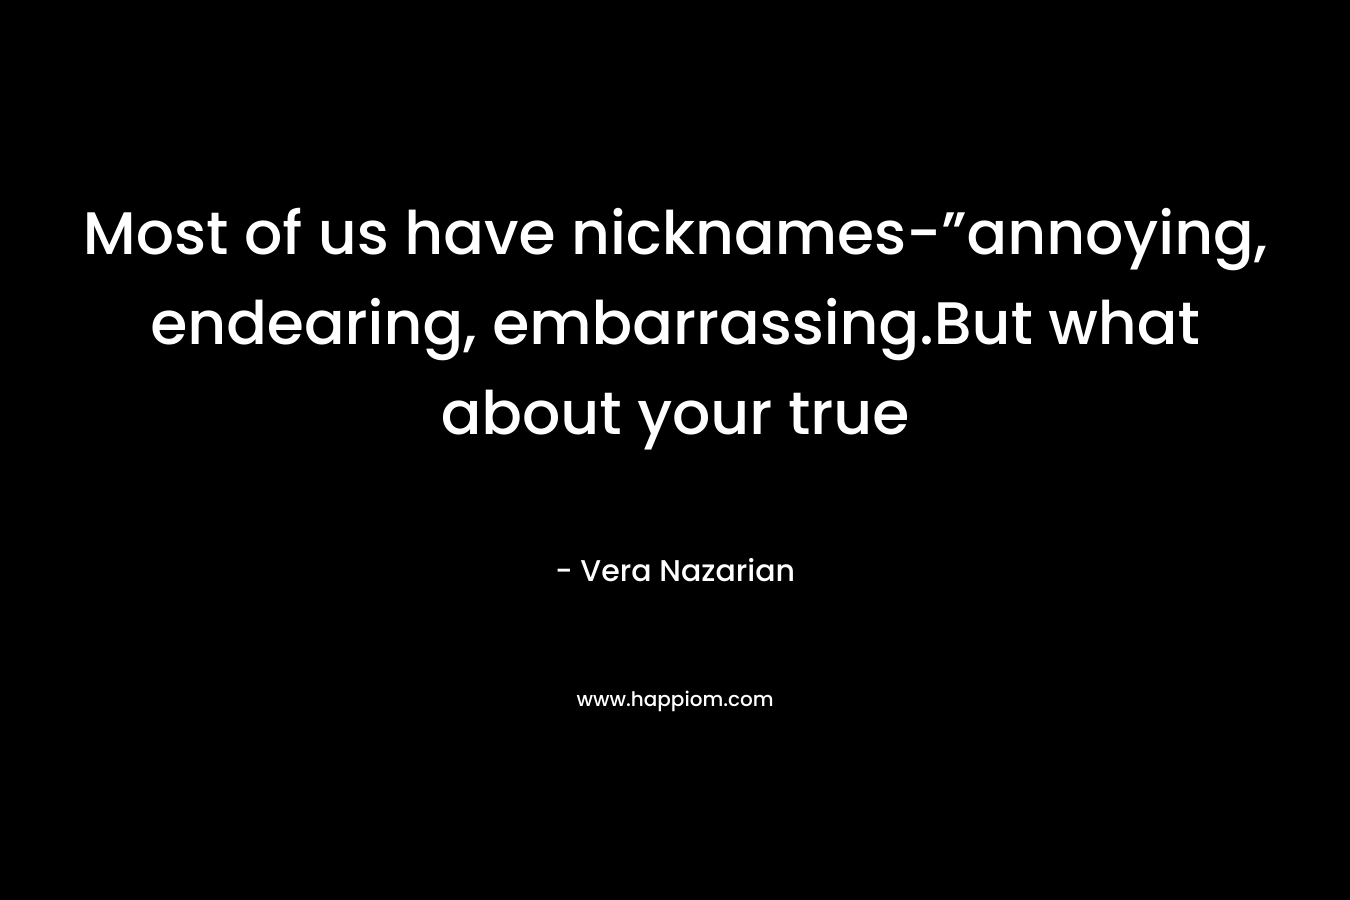 Most of us have nicknames-”annoying, endearing, embarrassing.But what about your true